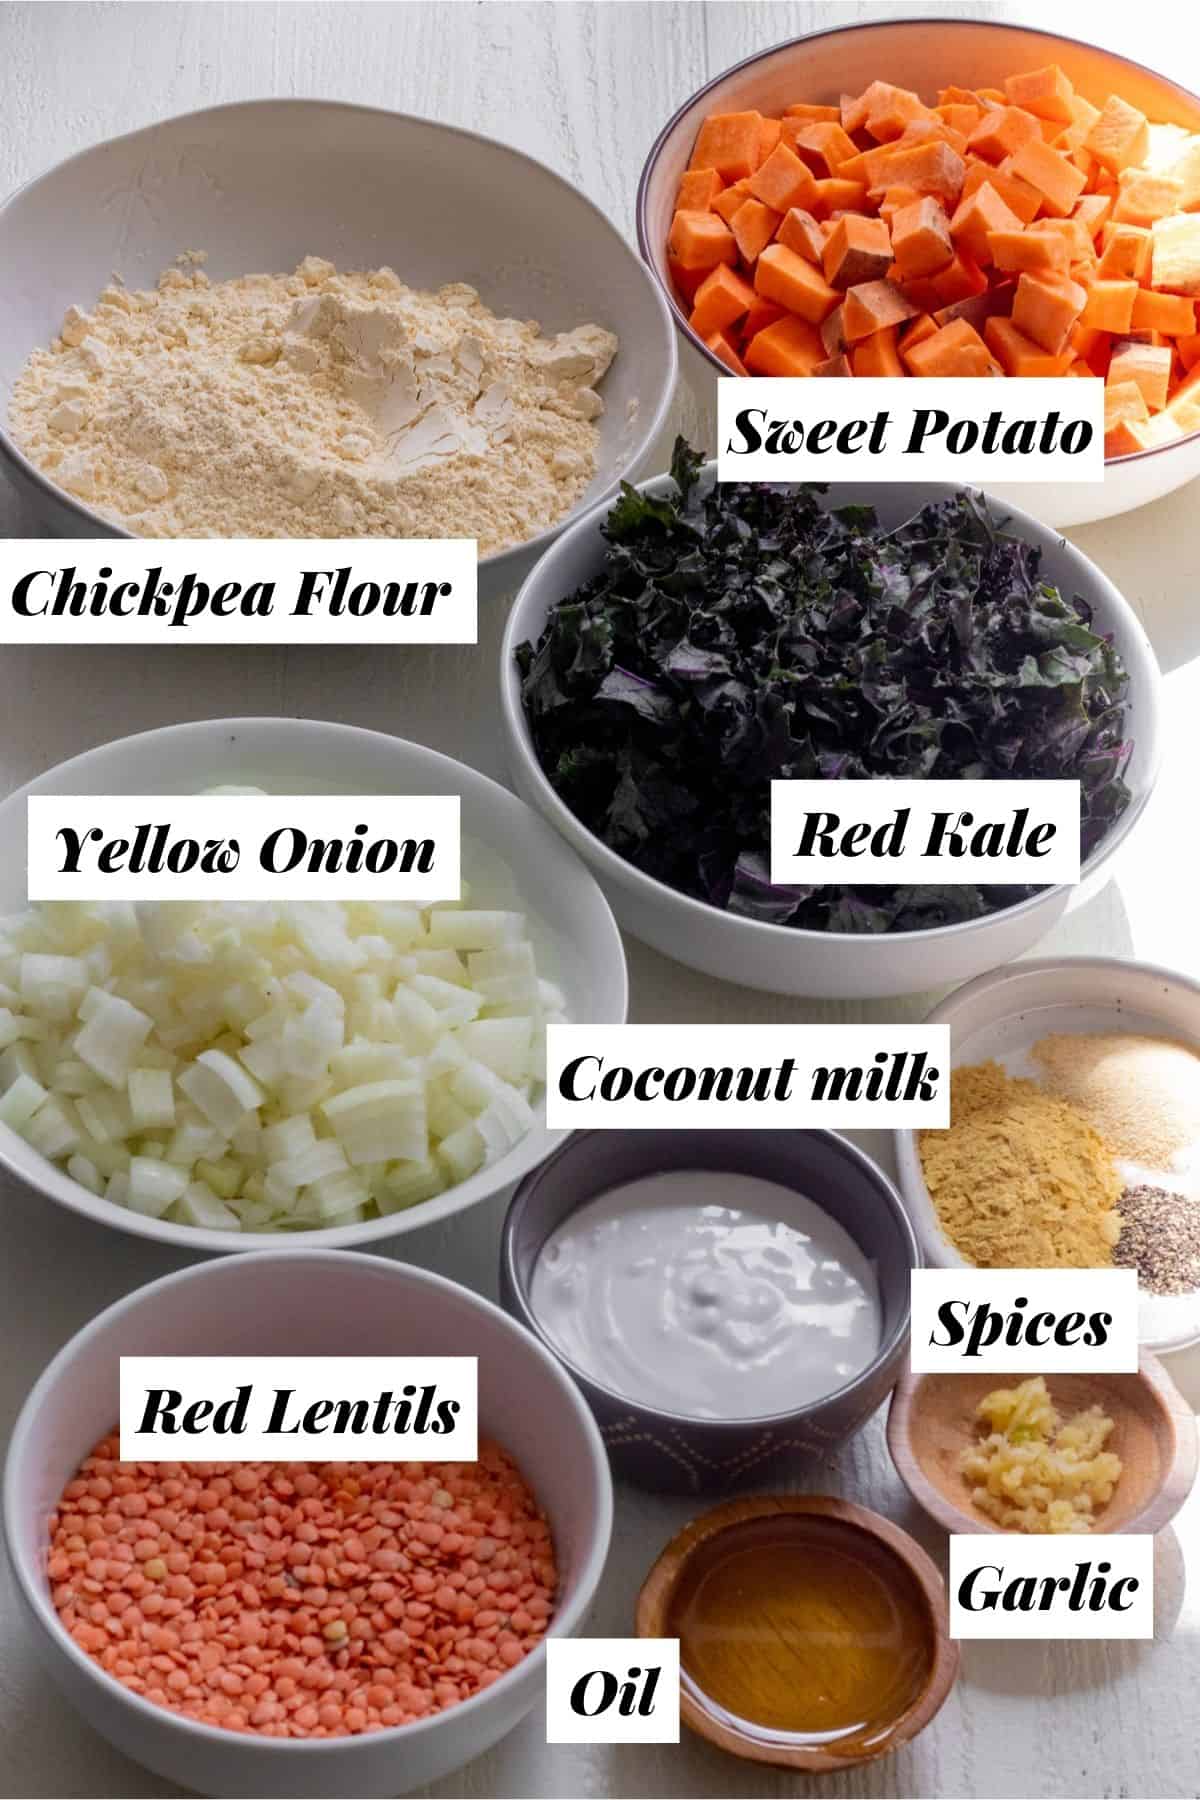 Ingredients needed measured out into bowls and labeled.